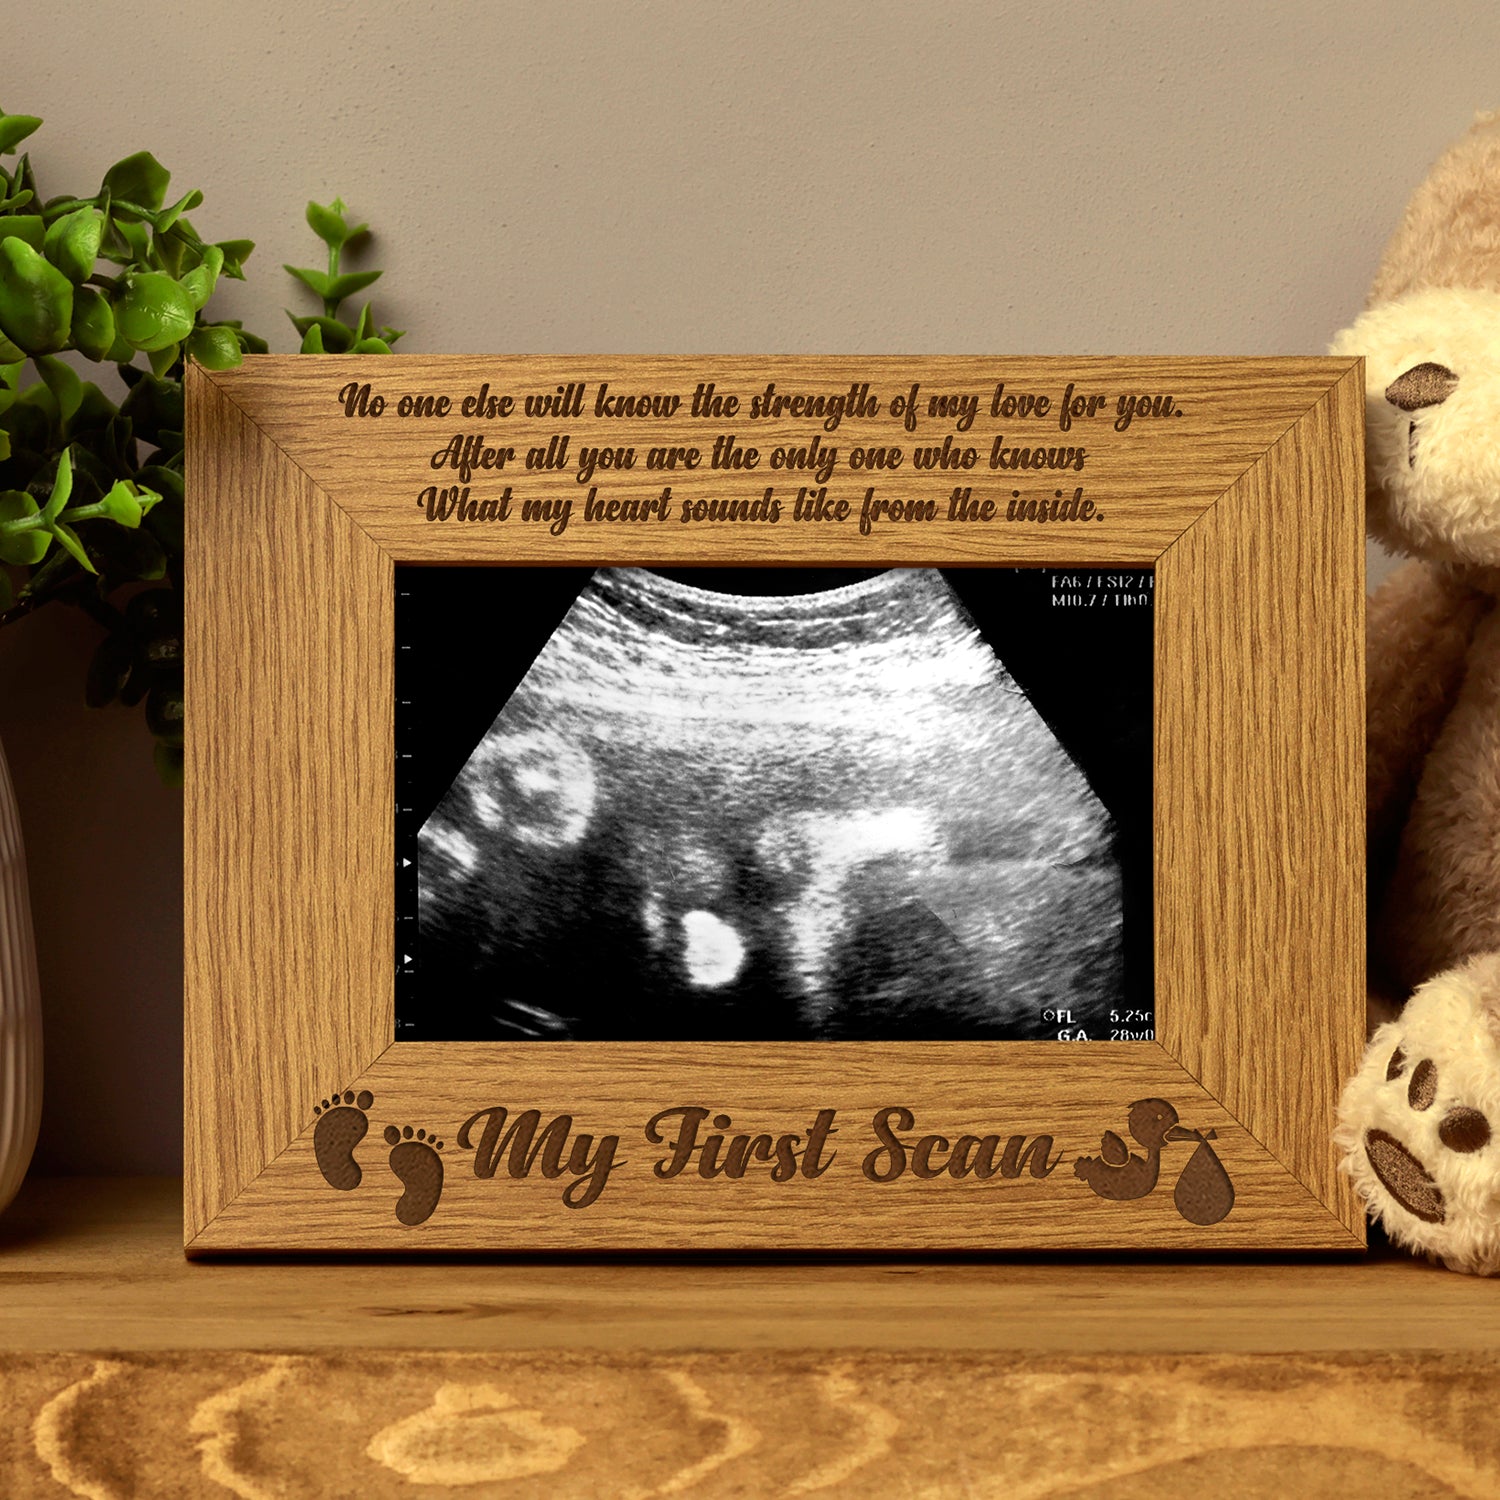 New Baby Pregnancy First Scan Wooden Photo Frame Gift - ukgiftstoreonline